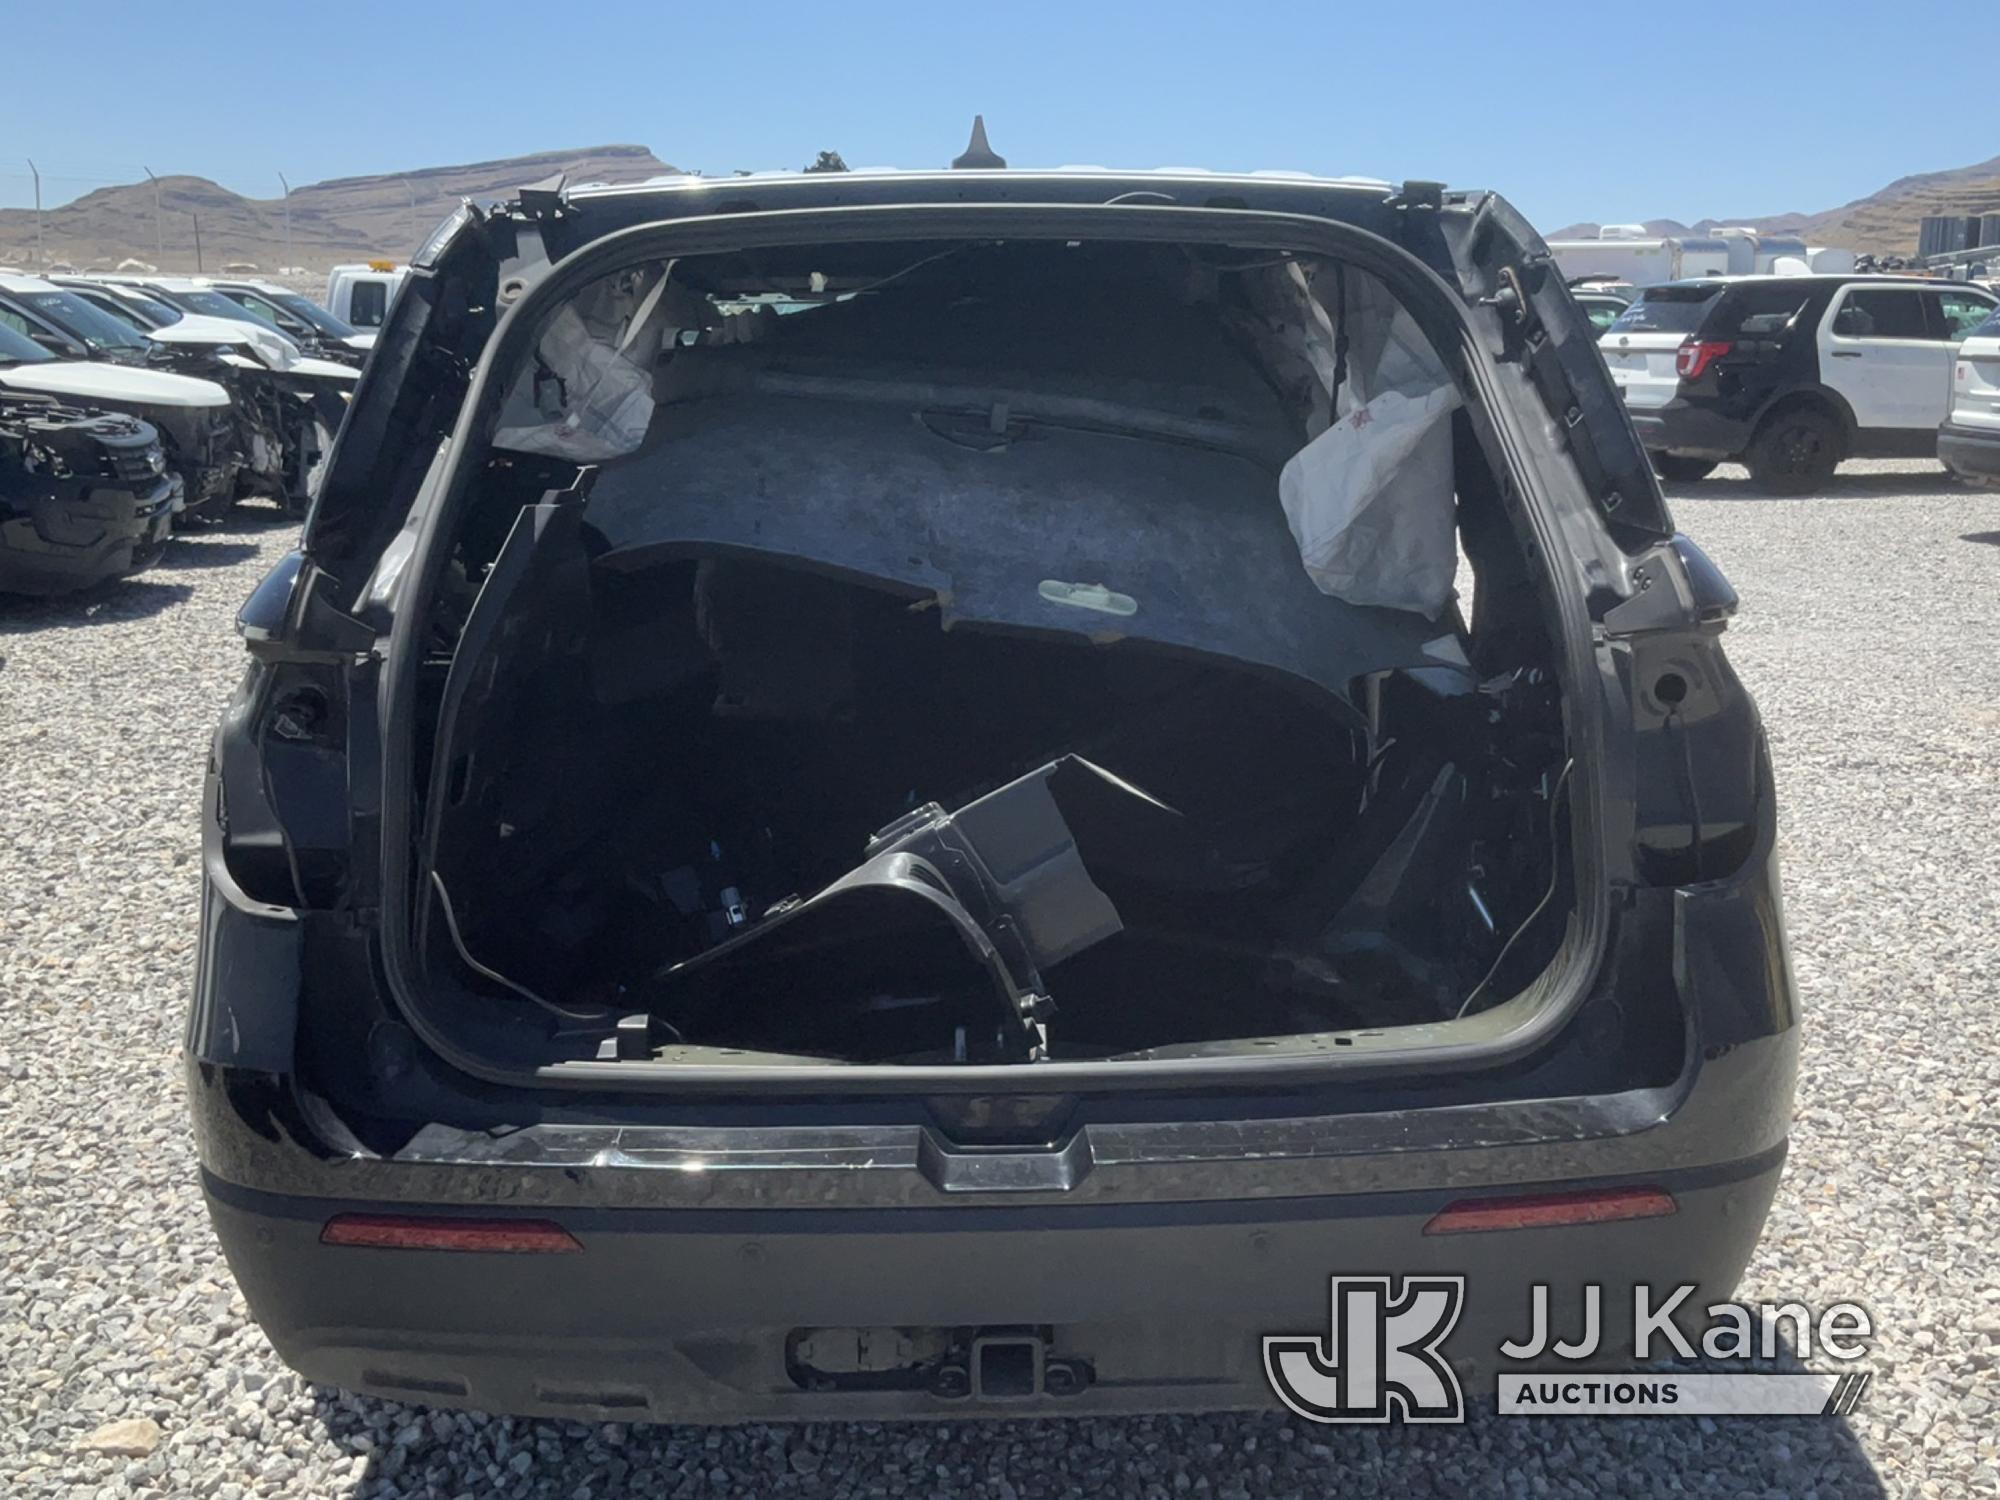 (Las Vegas, NV) 2021 Ford Explorer AWD Police Interceptor Dealers Only, Towed In, Wrecked, Airbags D